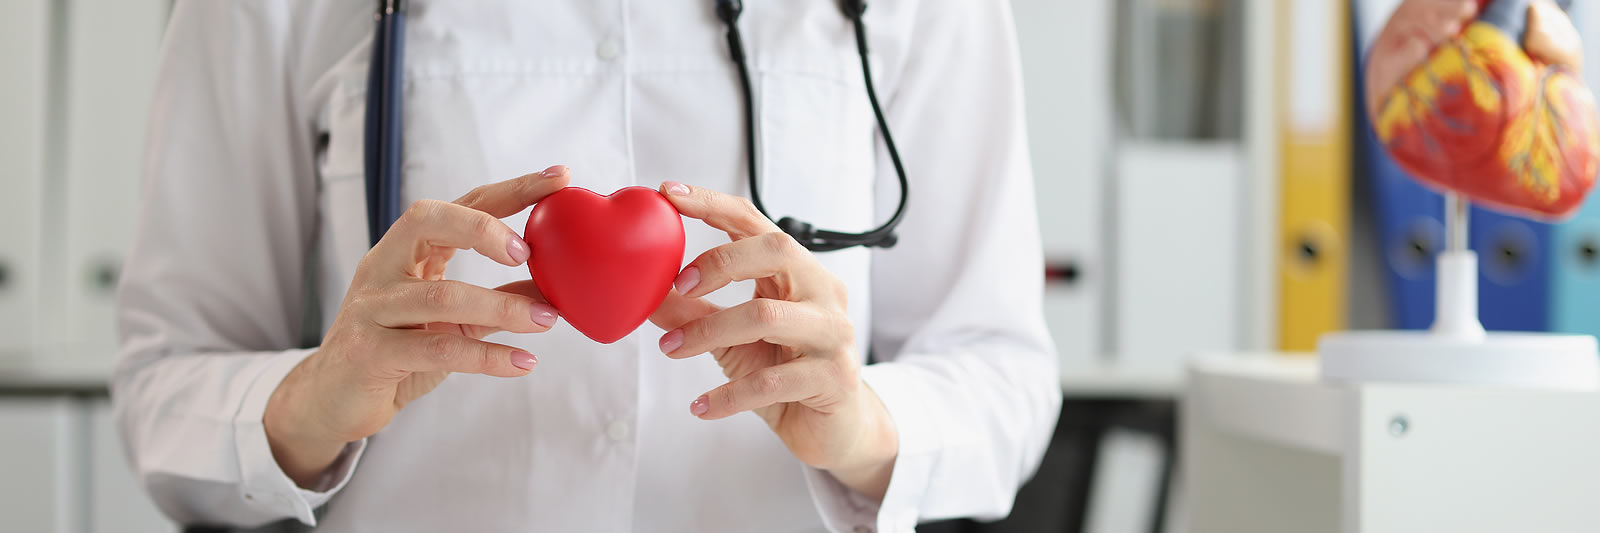 Young Adults and Heart Disease Risk